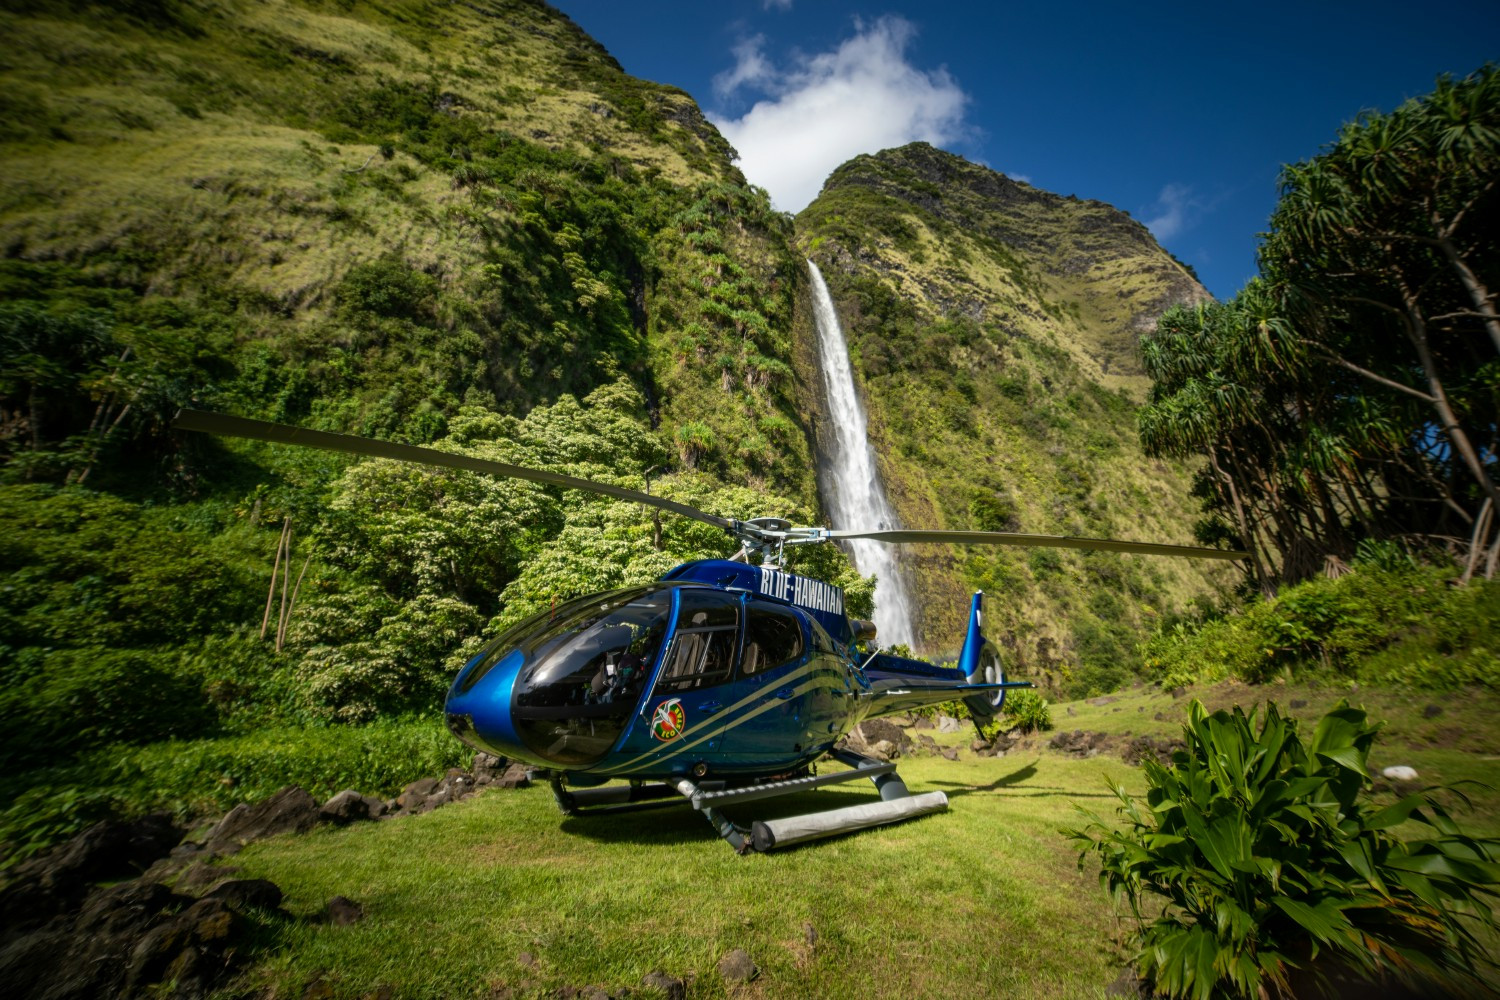 One of our tours features a landing at a private waterfall! Only available with Blue Hawaiian.